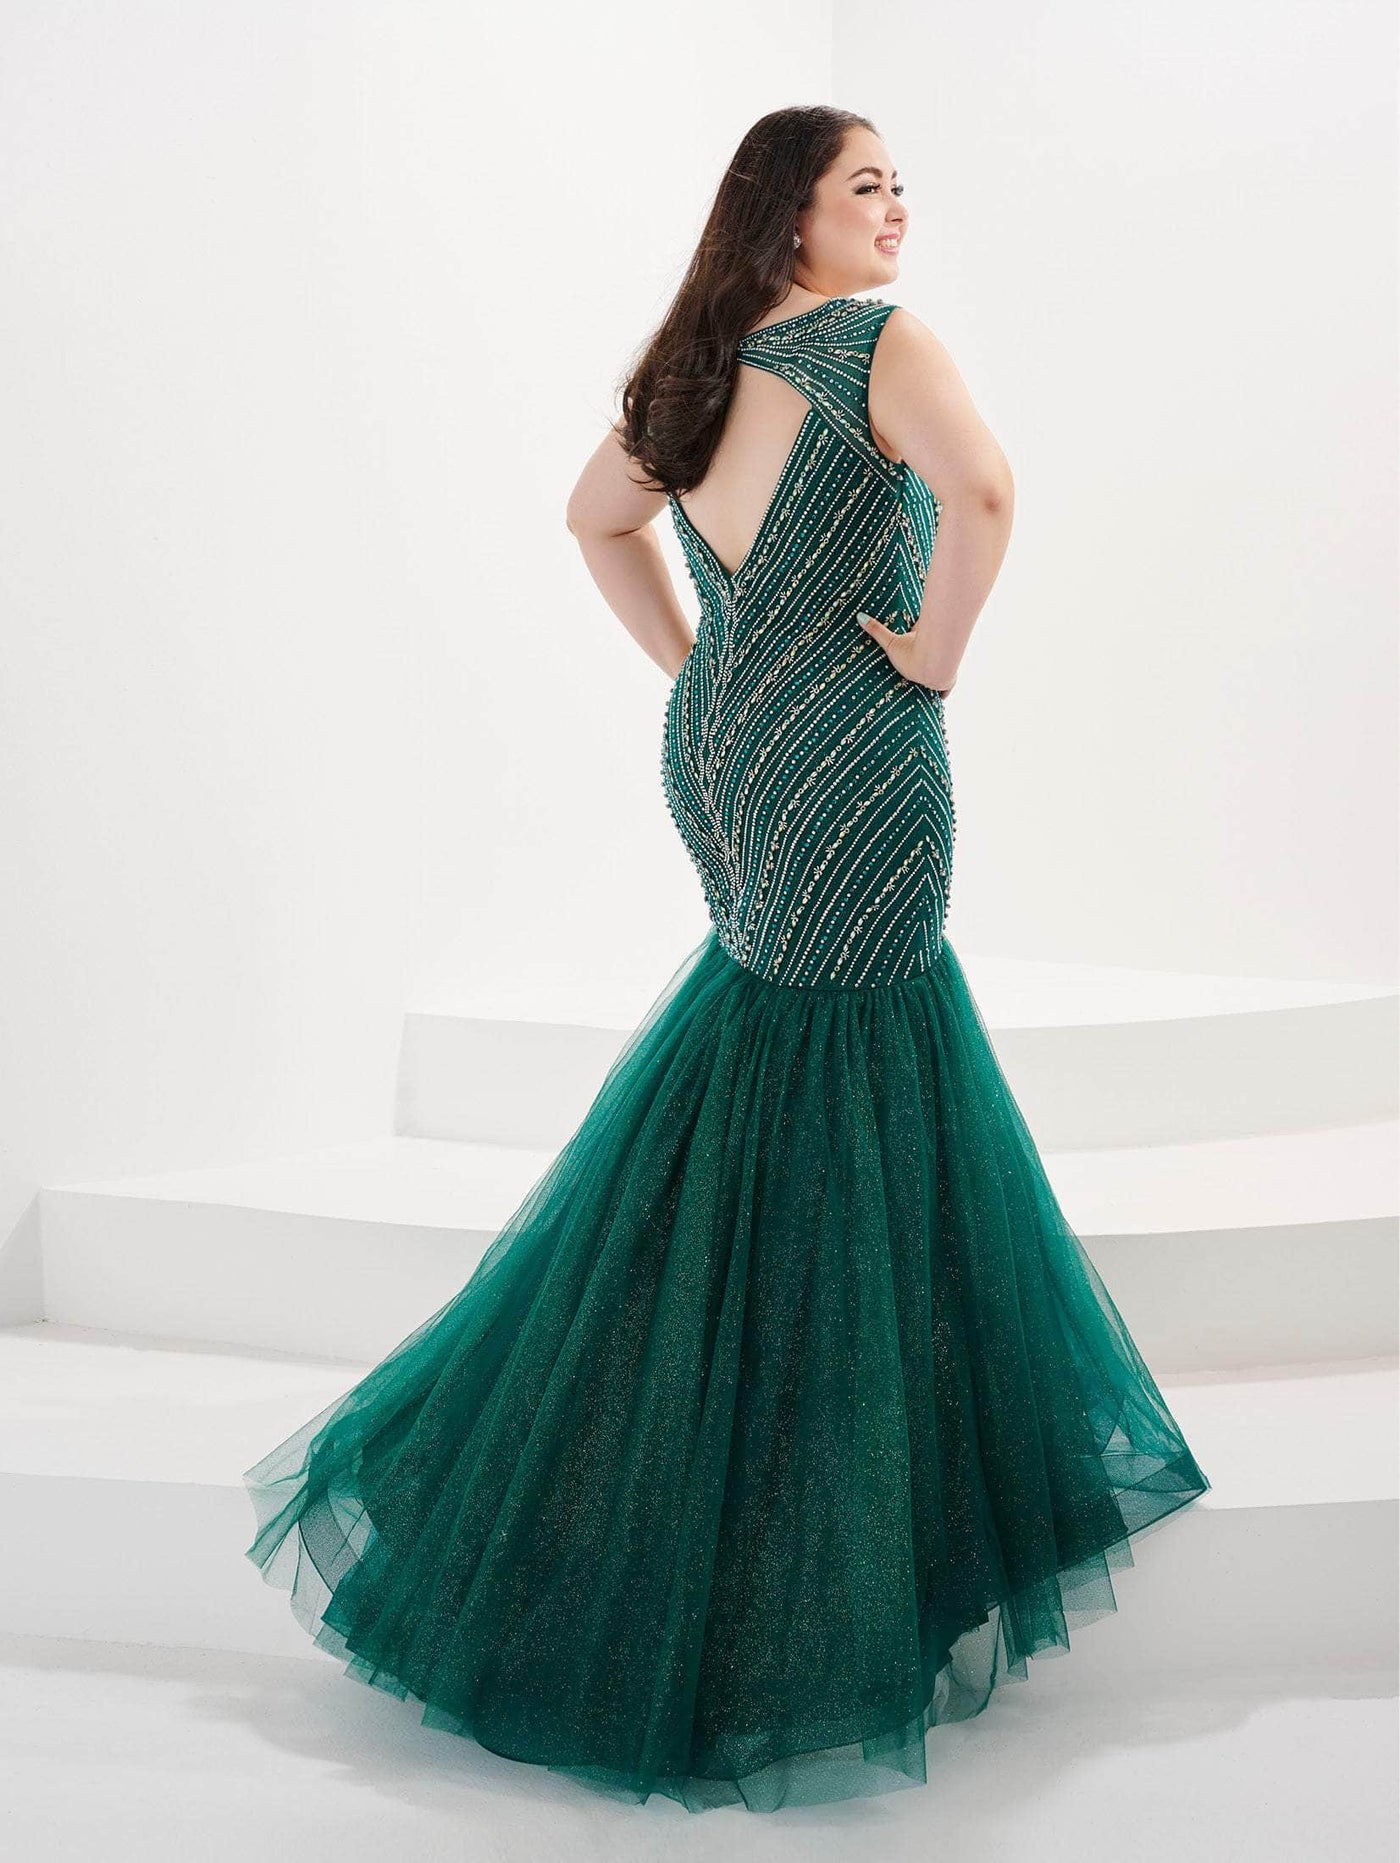 Tiffany Designs by Christina Wu 16045 - Glittered Mermaid Prom Gown Special Occasion Dress